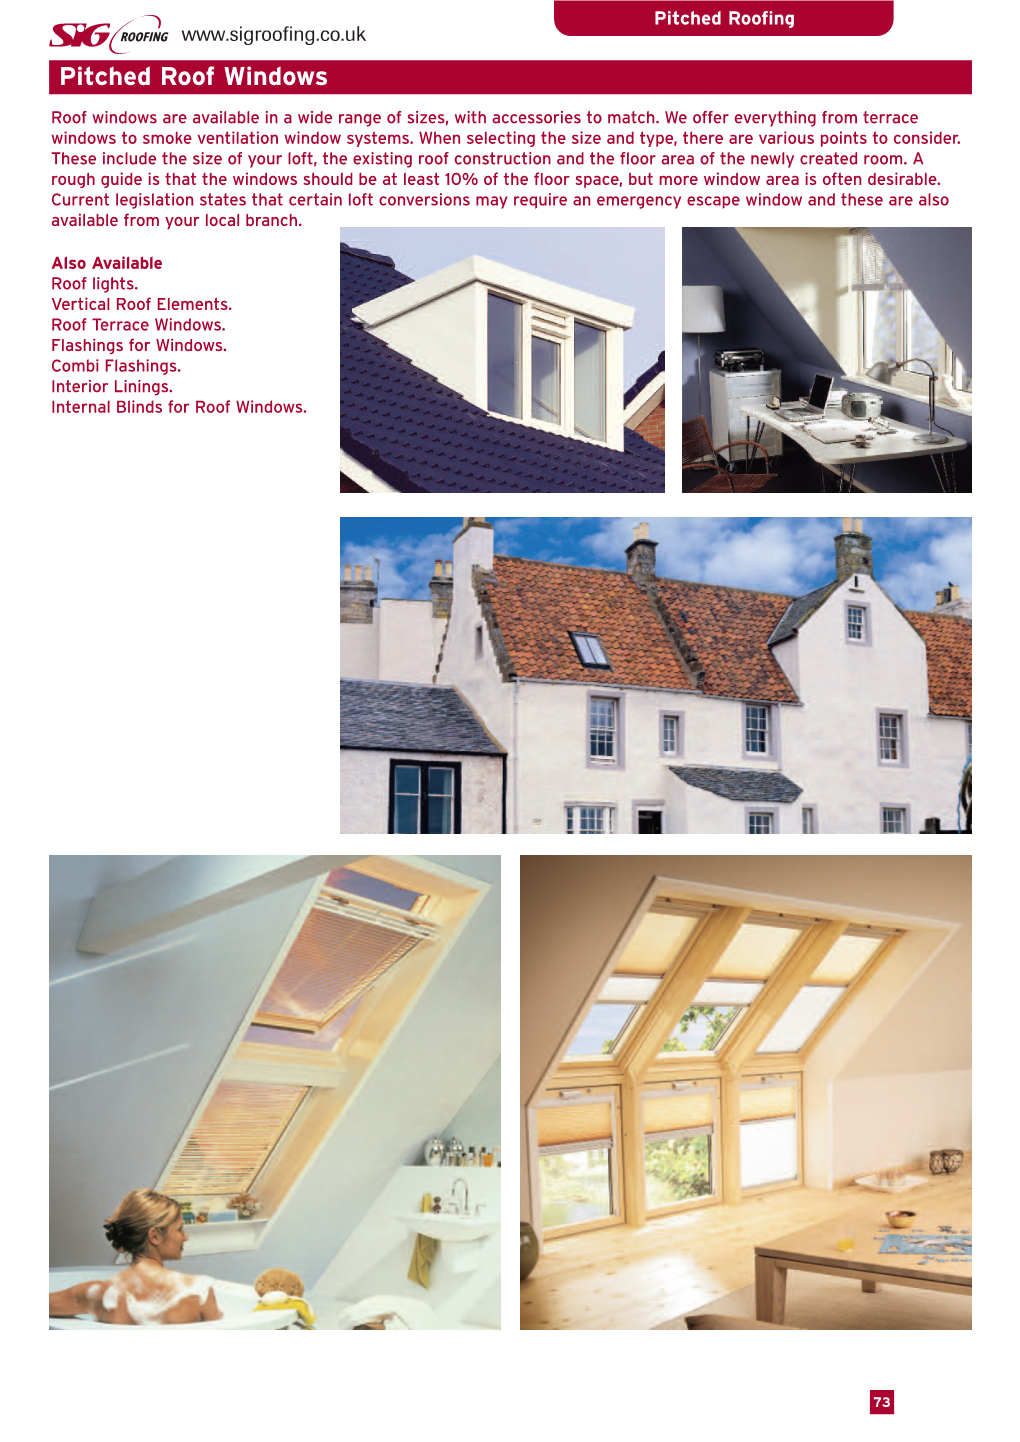 Pitched Roof Windows